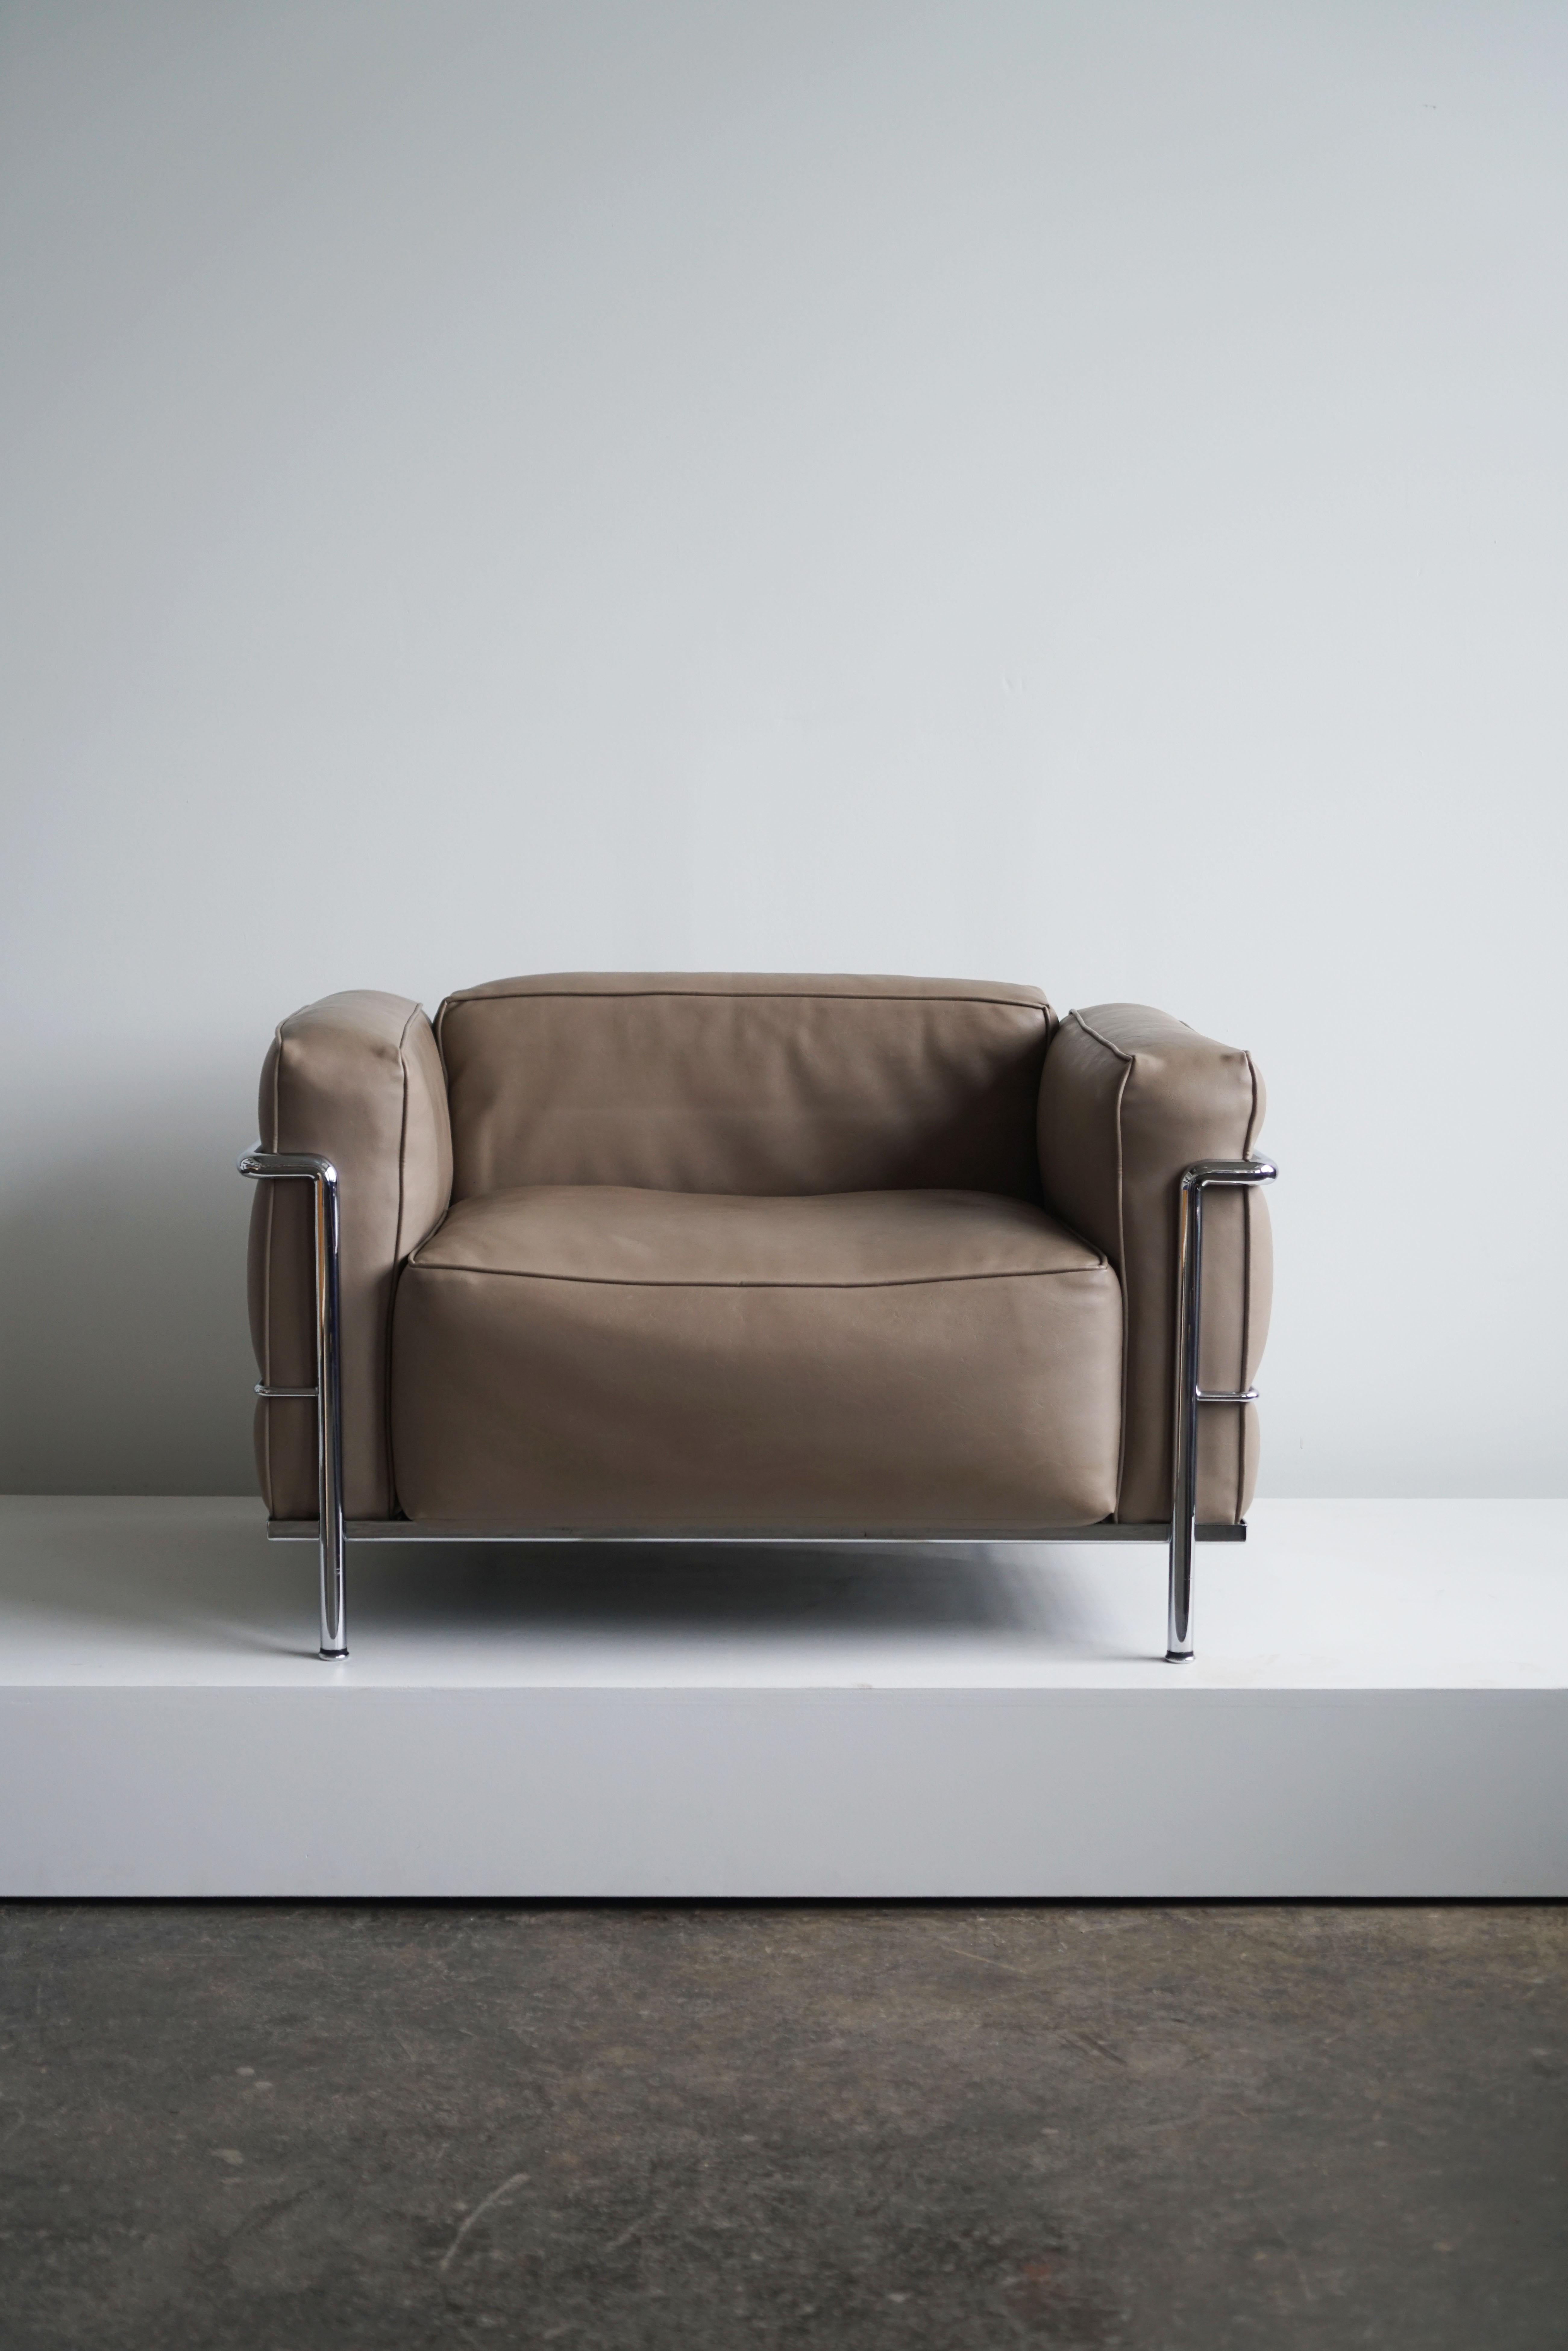 LC3 Grand Modele armchair in beige leather by Le Corbusier for Cassina, signed
Circa 1970's
Paper manufacturer labels attached to underside, as well as engraved numbers to underside of frame. 
 
Measures: H 24.5